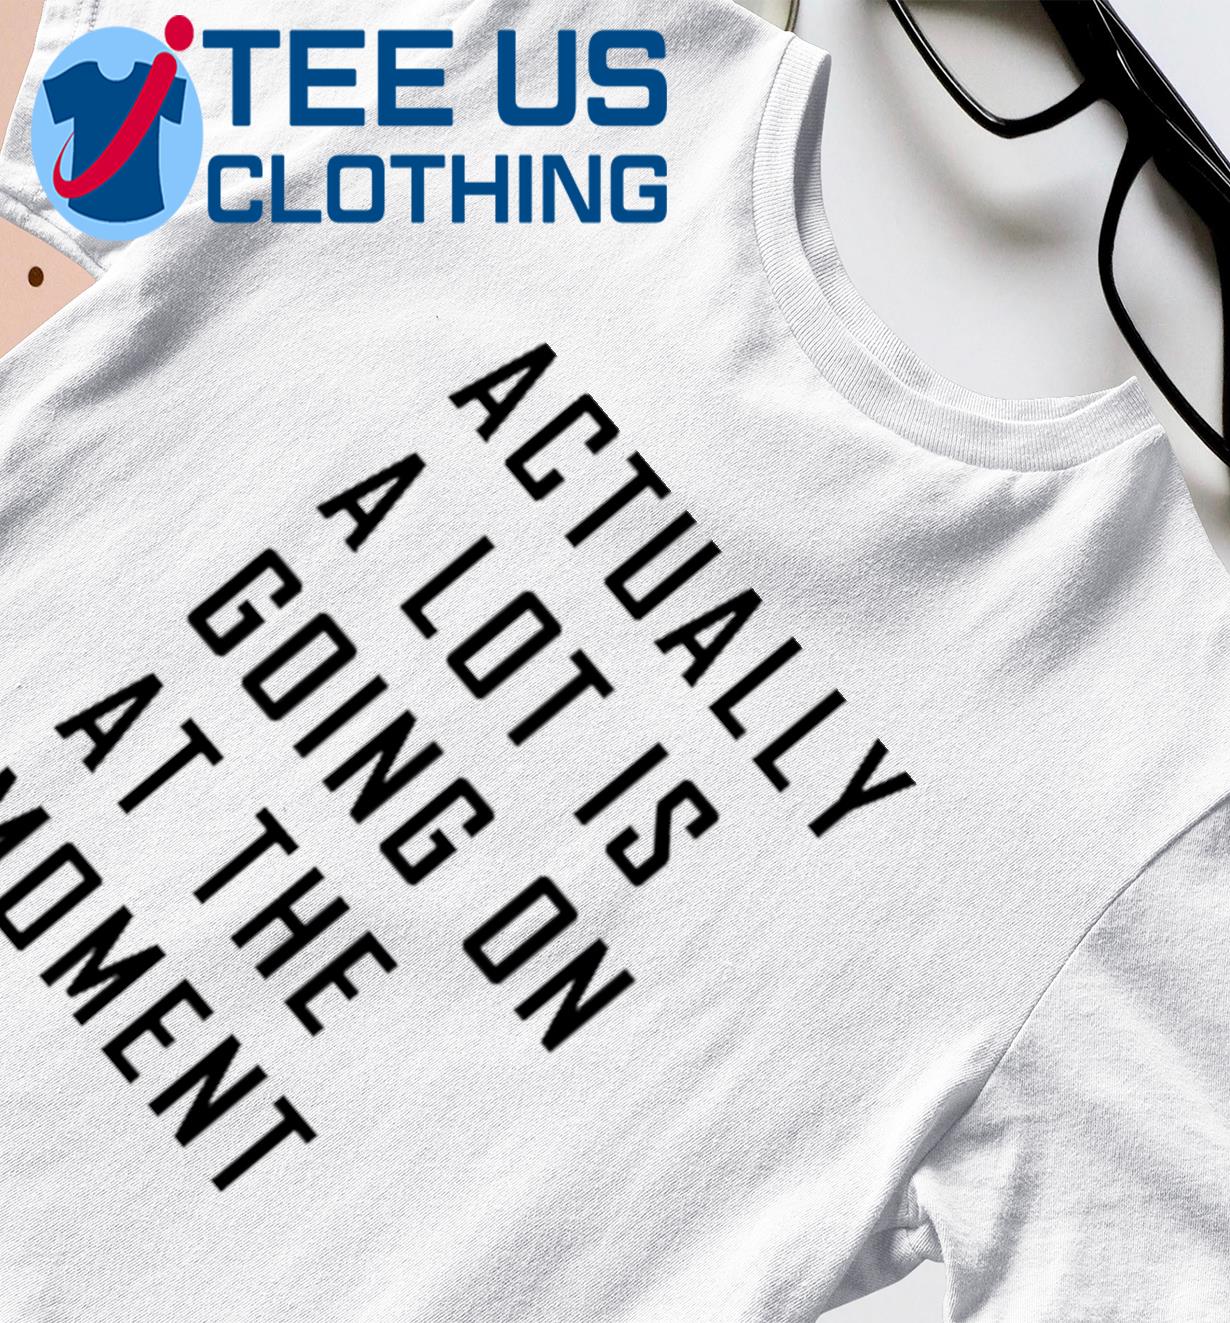 Actually a lot is going on at the moment T-shirt